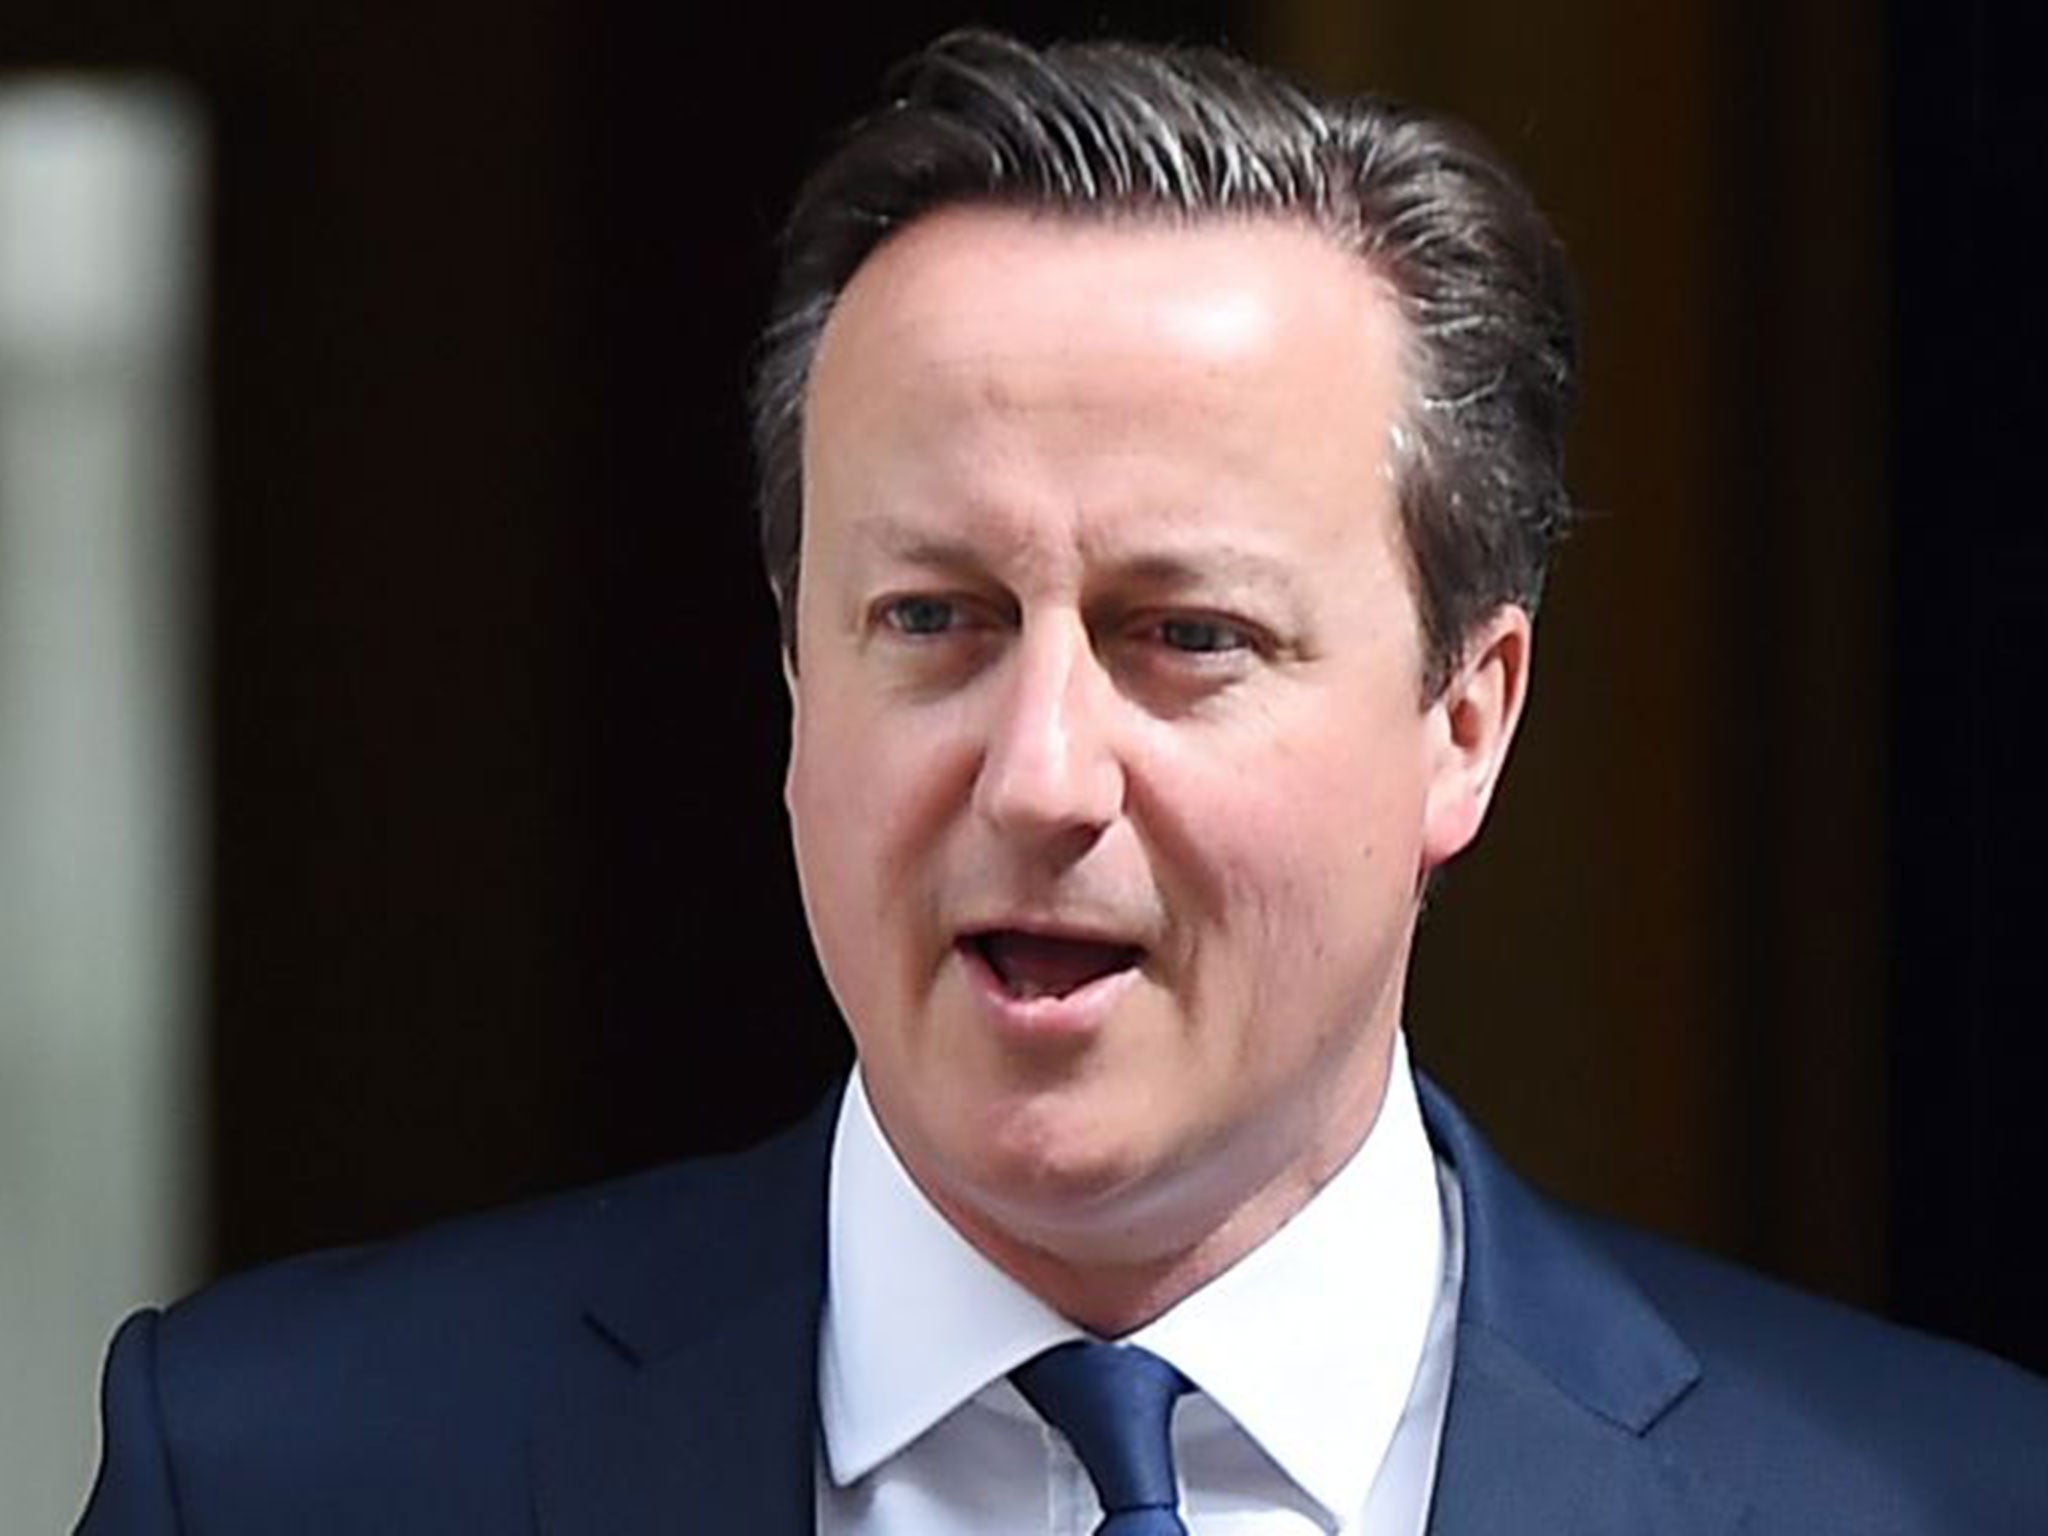 David Cameron plans to cut the number of parliamentary seats from 650 to 600